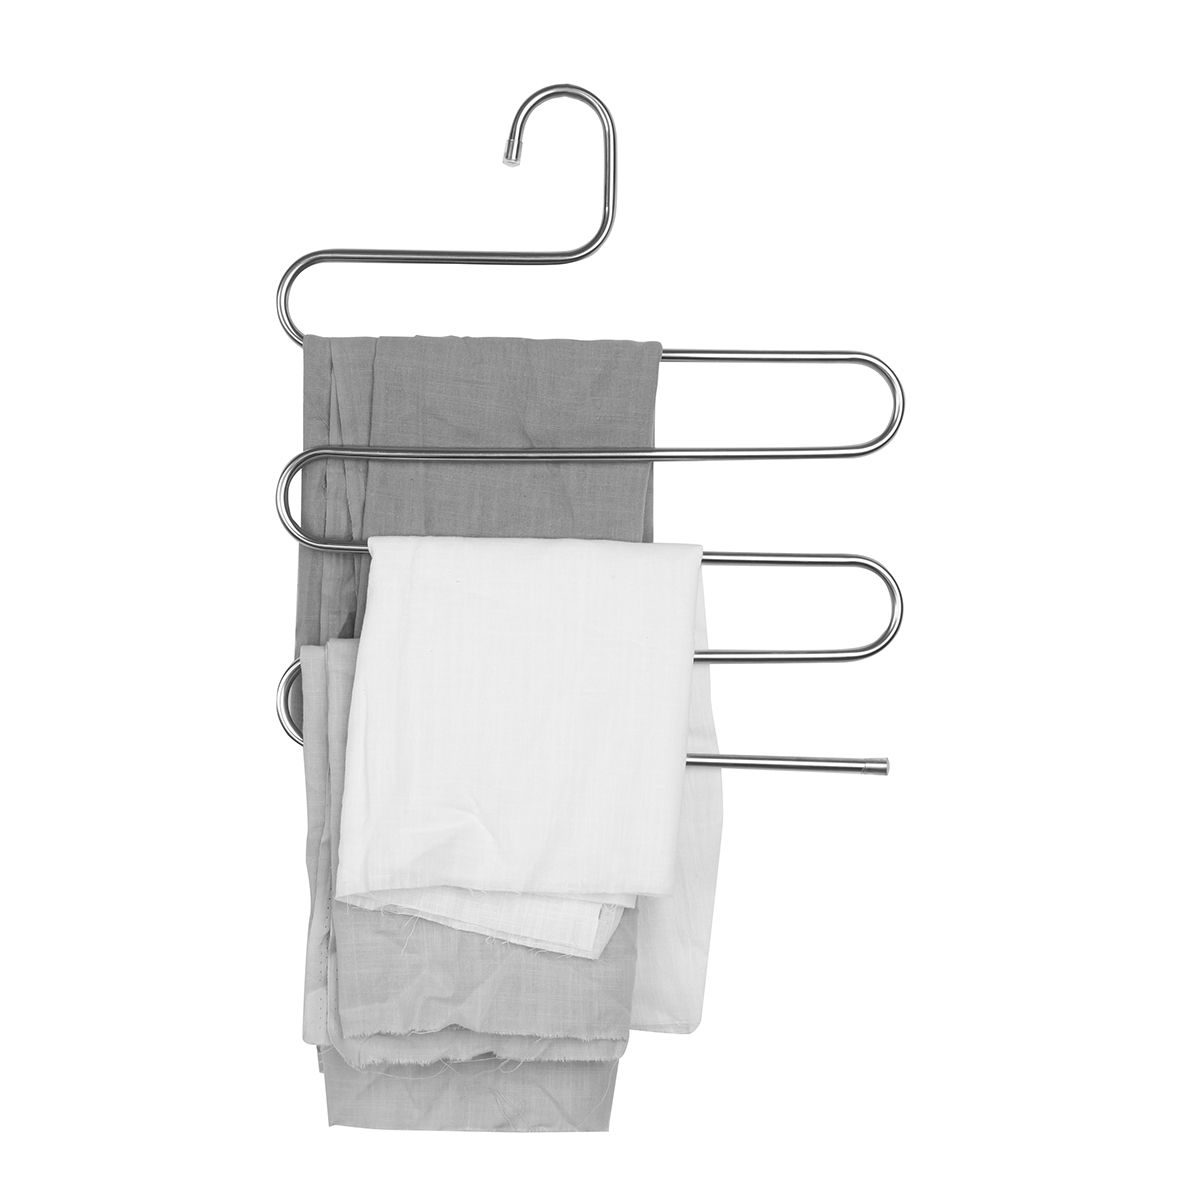 5-Layers-Pants-Hanger-Trousers-Towels-Hanging-Cloth-Clothing-Rack-Space-Saver-1304894